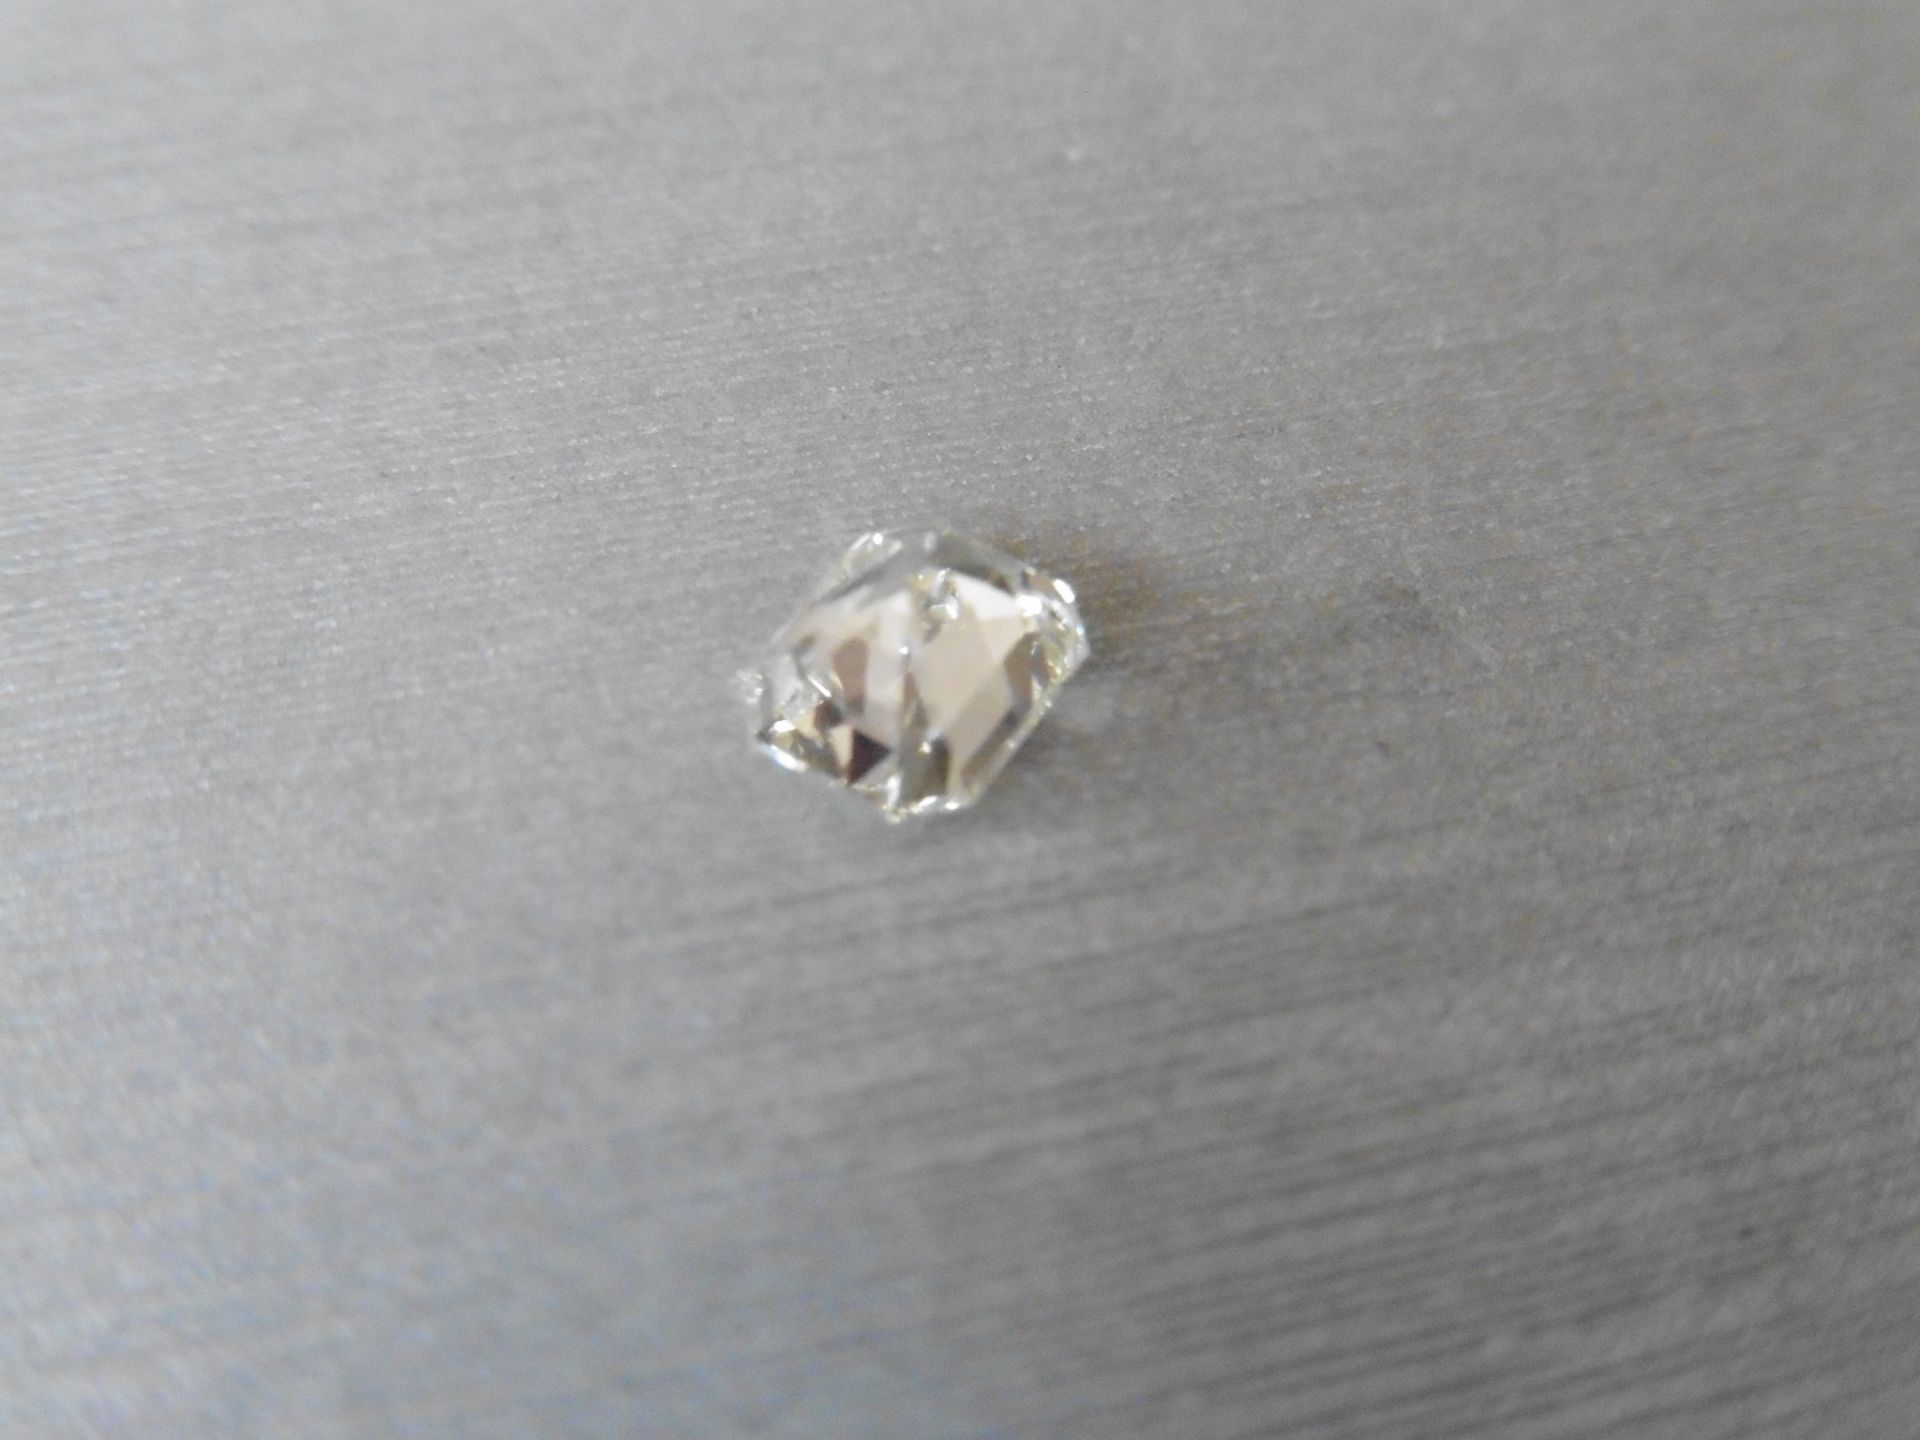 0.92ct single radiant cut diamond. Measures 6.00 x 5.3mm. J colour and VVS clarity. Valued at £6950. - Image 4 of 5